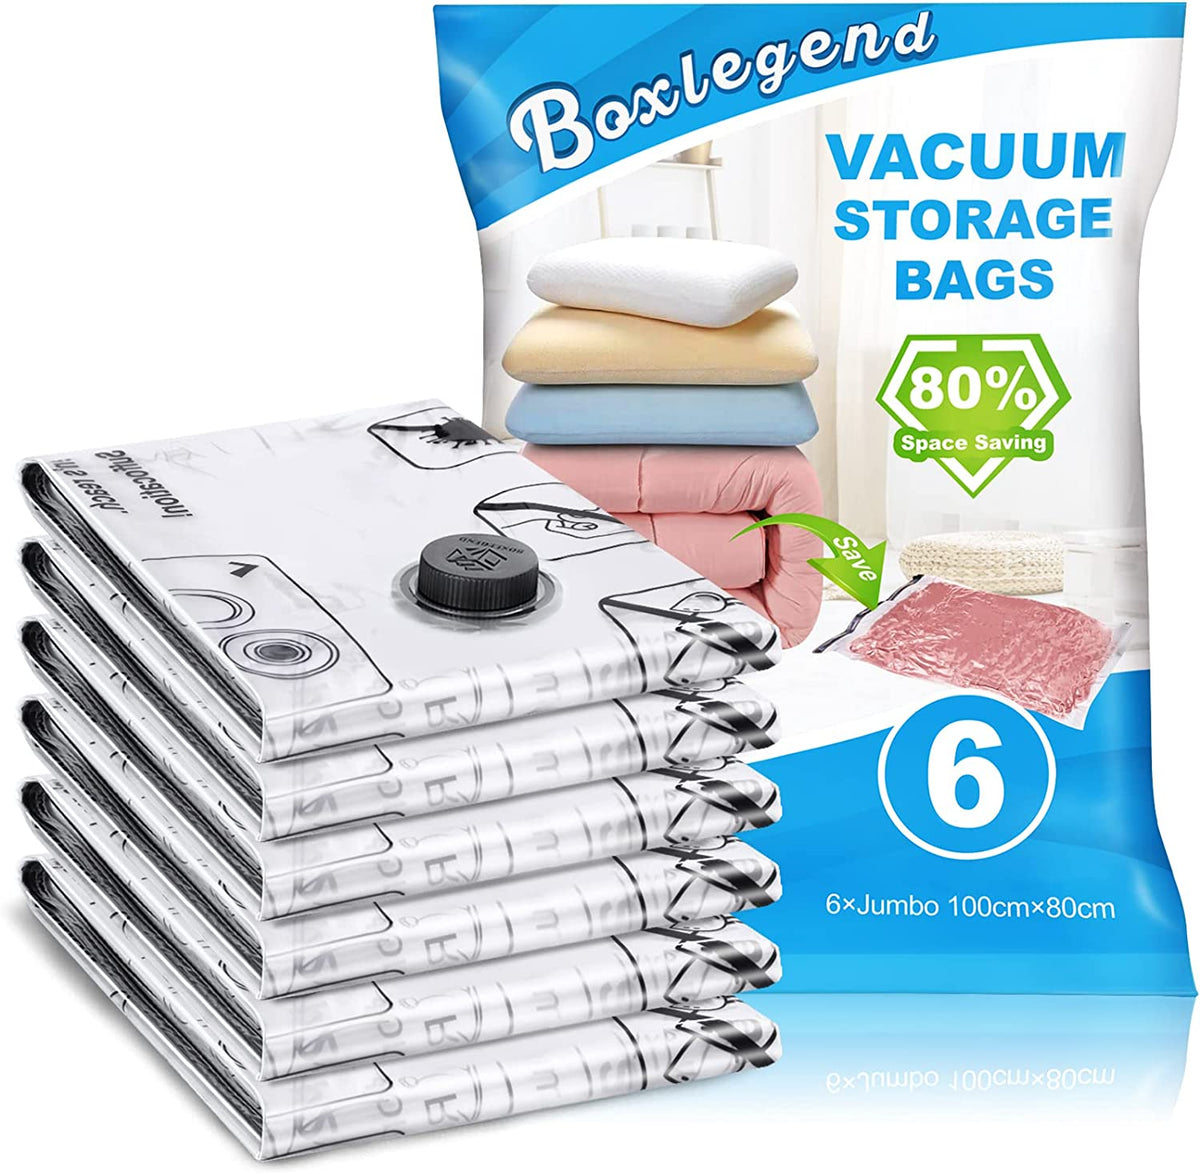 Spacesaver Vacuum Storage Bags (Jumbo 2 Pack) Save 80% on Clothes Storage  Space - Vacuum Sealer Bags for Comforters, Blankets, Bedding, Clothing 